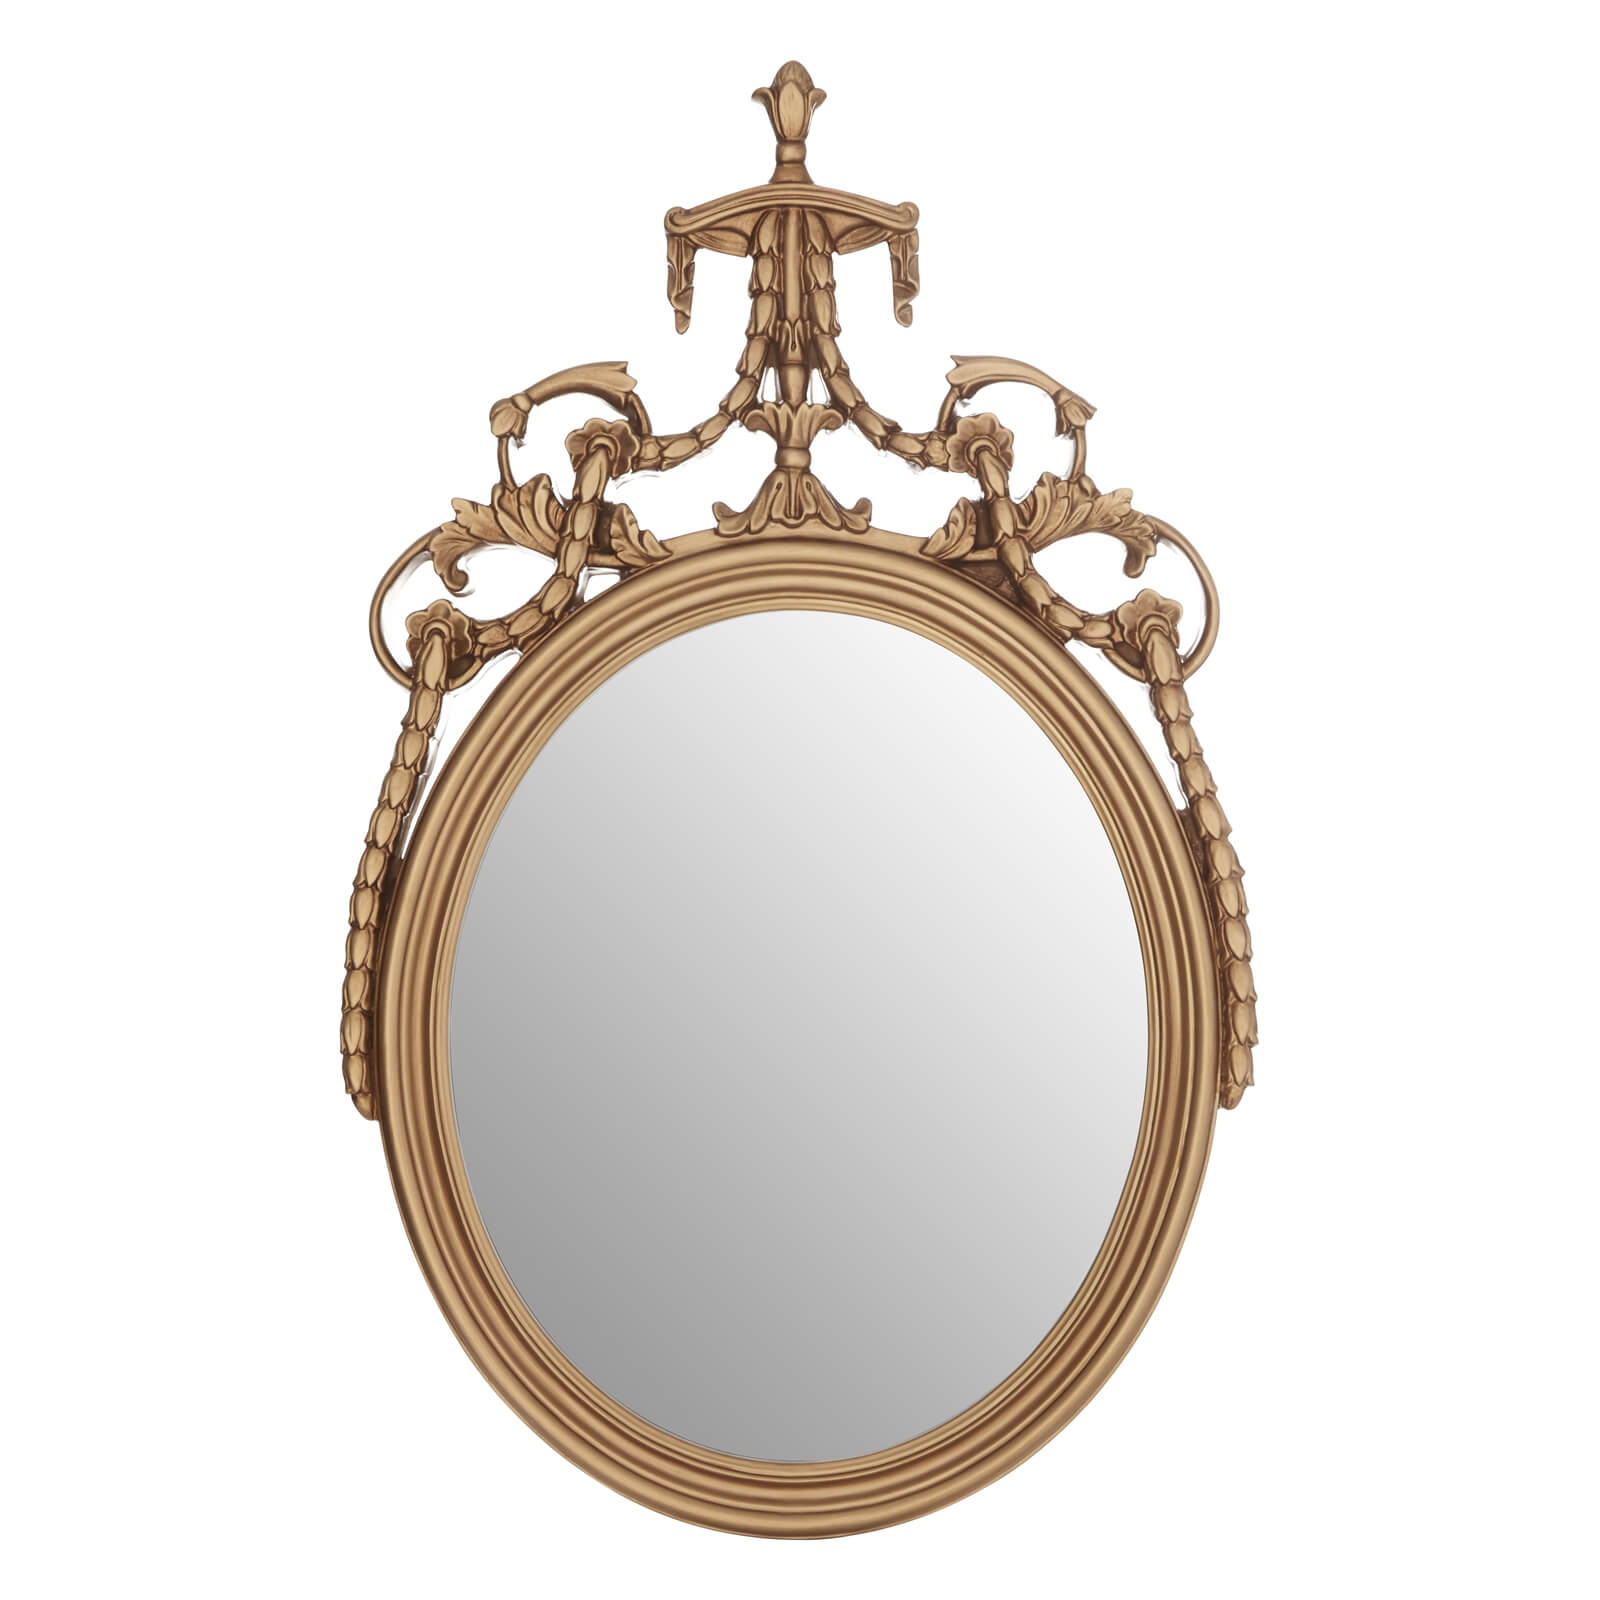 Oval Acanthus Leaf Wall Mirror - Gold